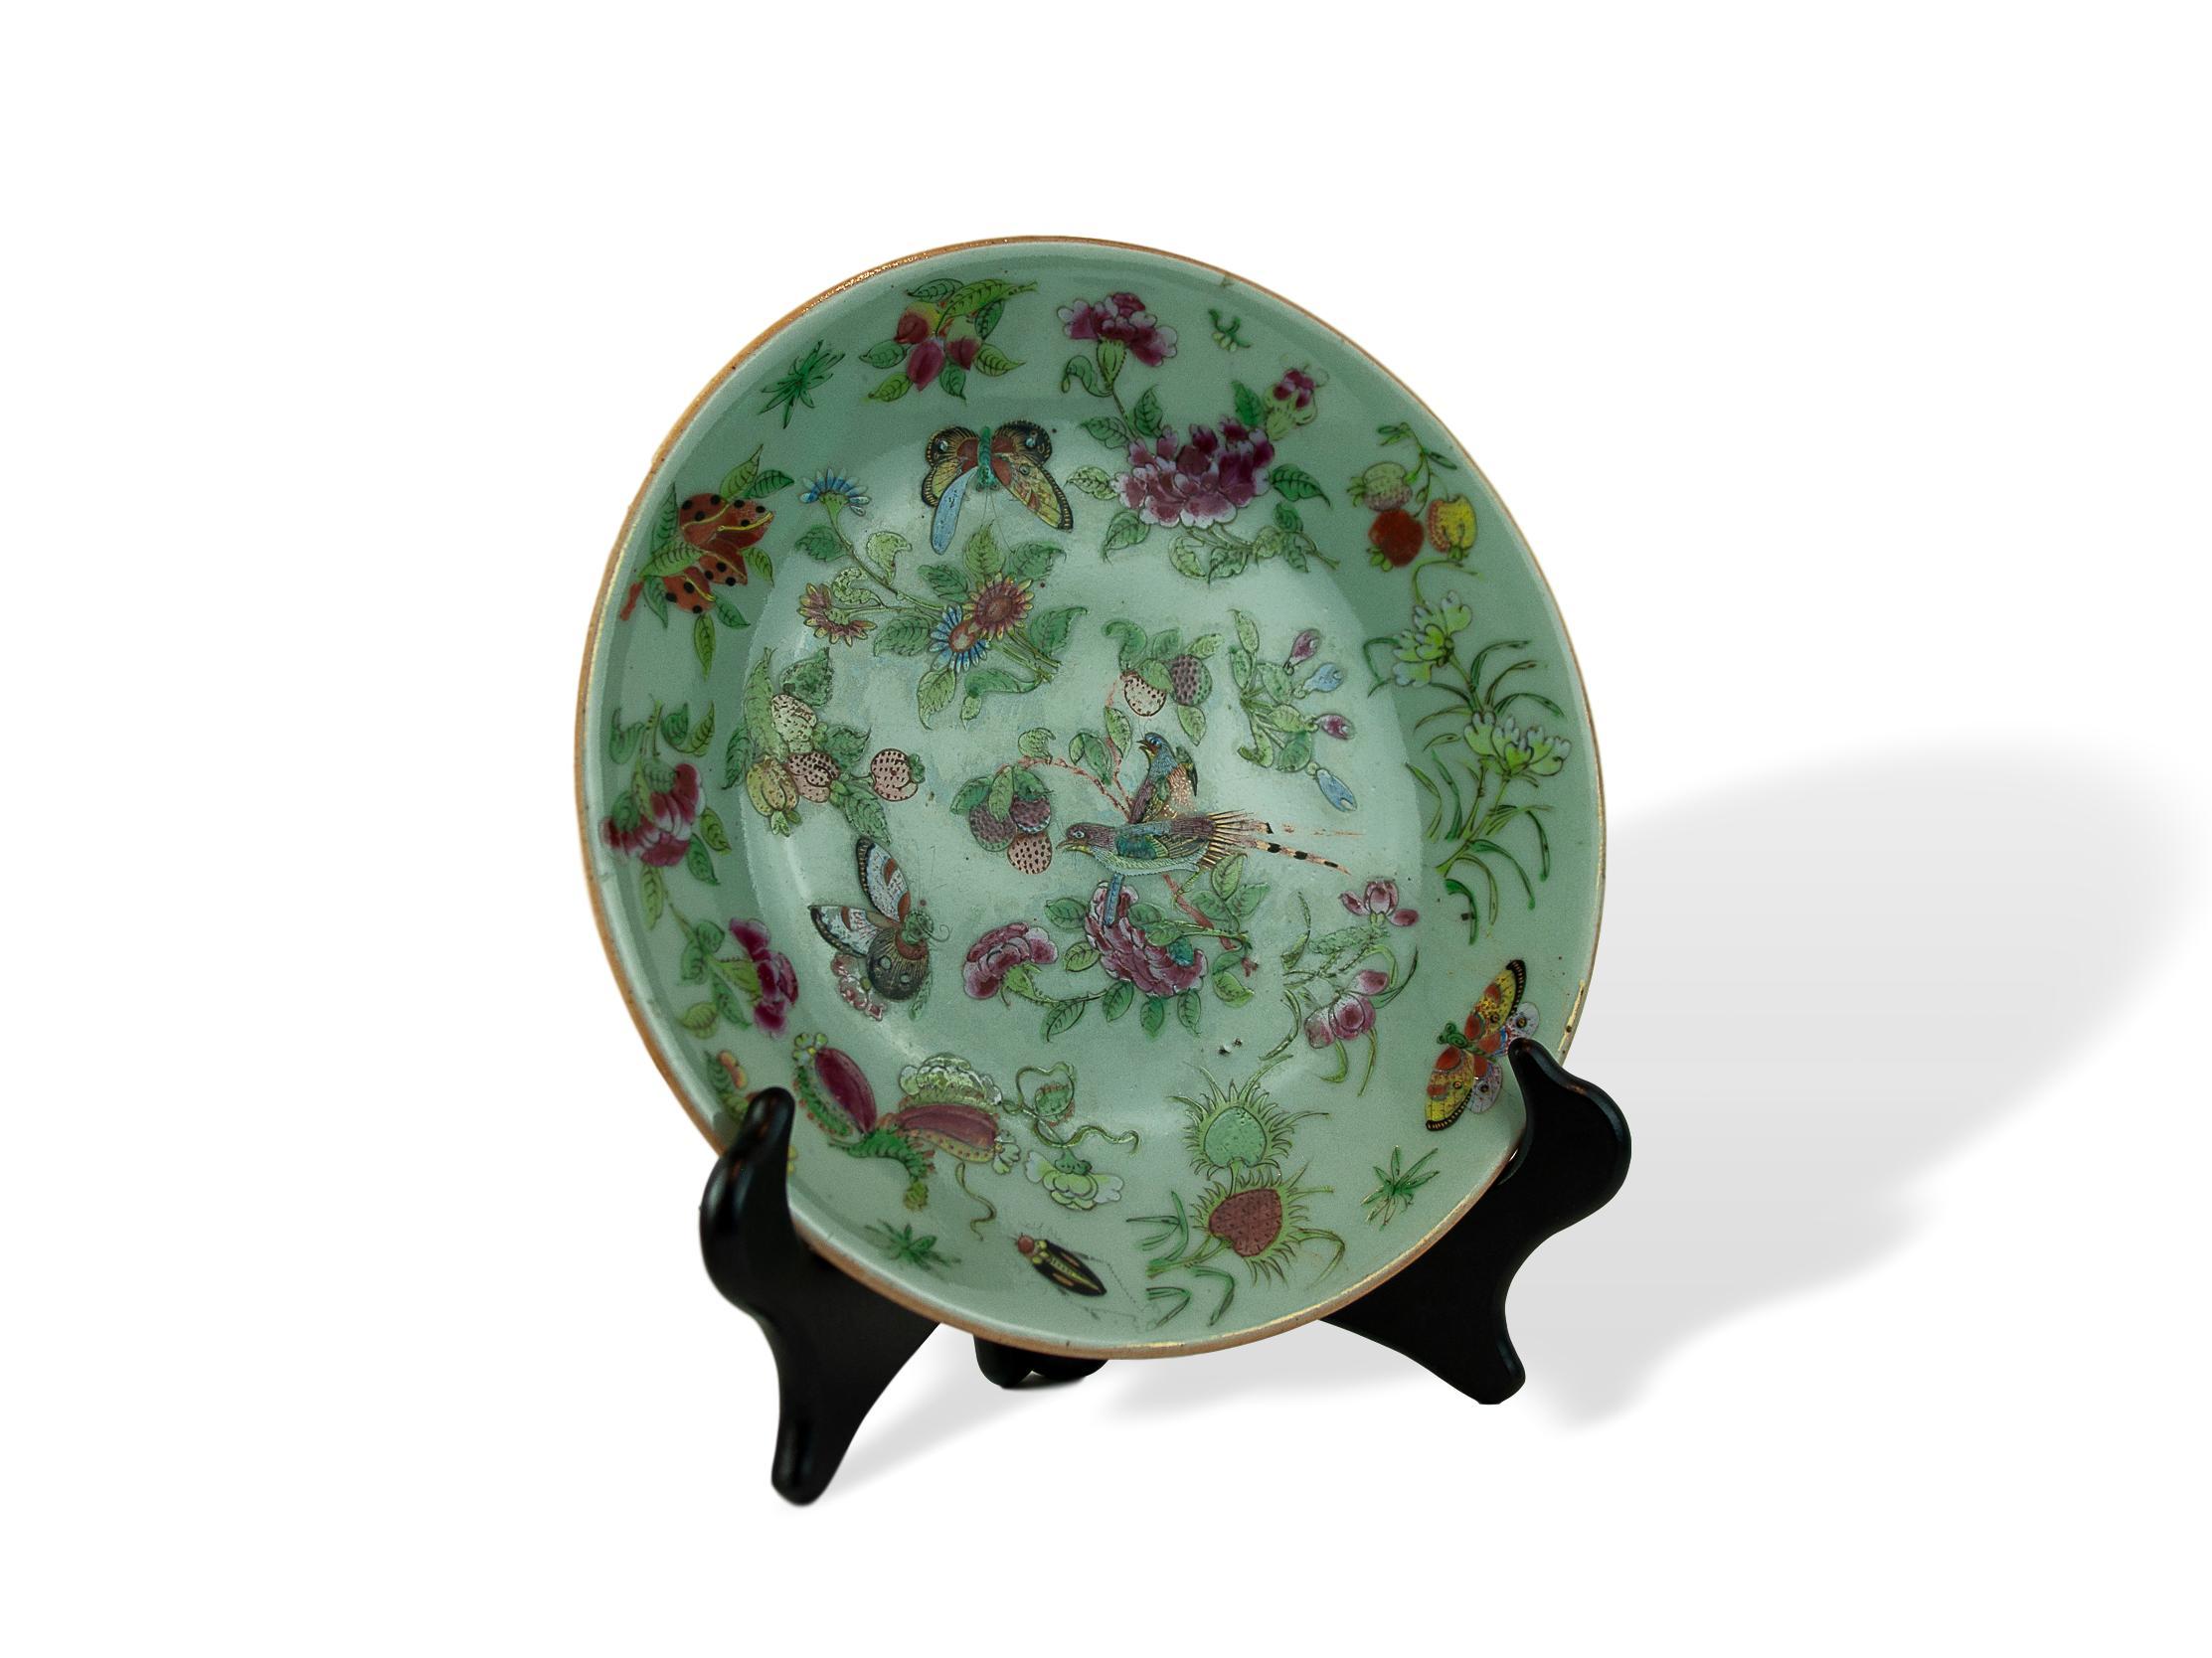 Chinese Export Porcelain Celadon Famille Rose 10-inch plate, Cantonese, Qing Dynasty, ca. 1850, profusely decorated in polychrome enamels depicting pheasants, butterflies, fruit, florals, with a single gilded cricket, on a blue-green celadon ground,